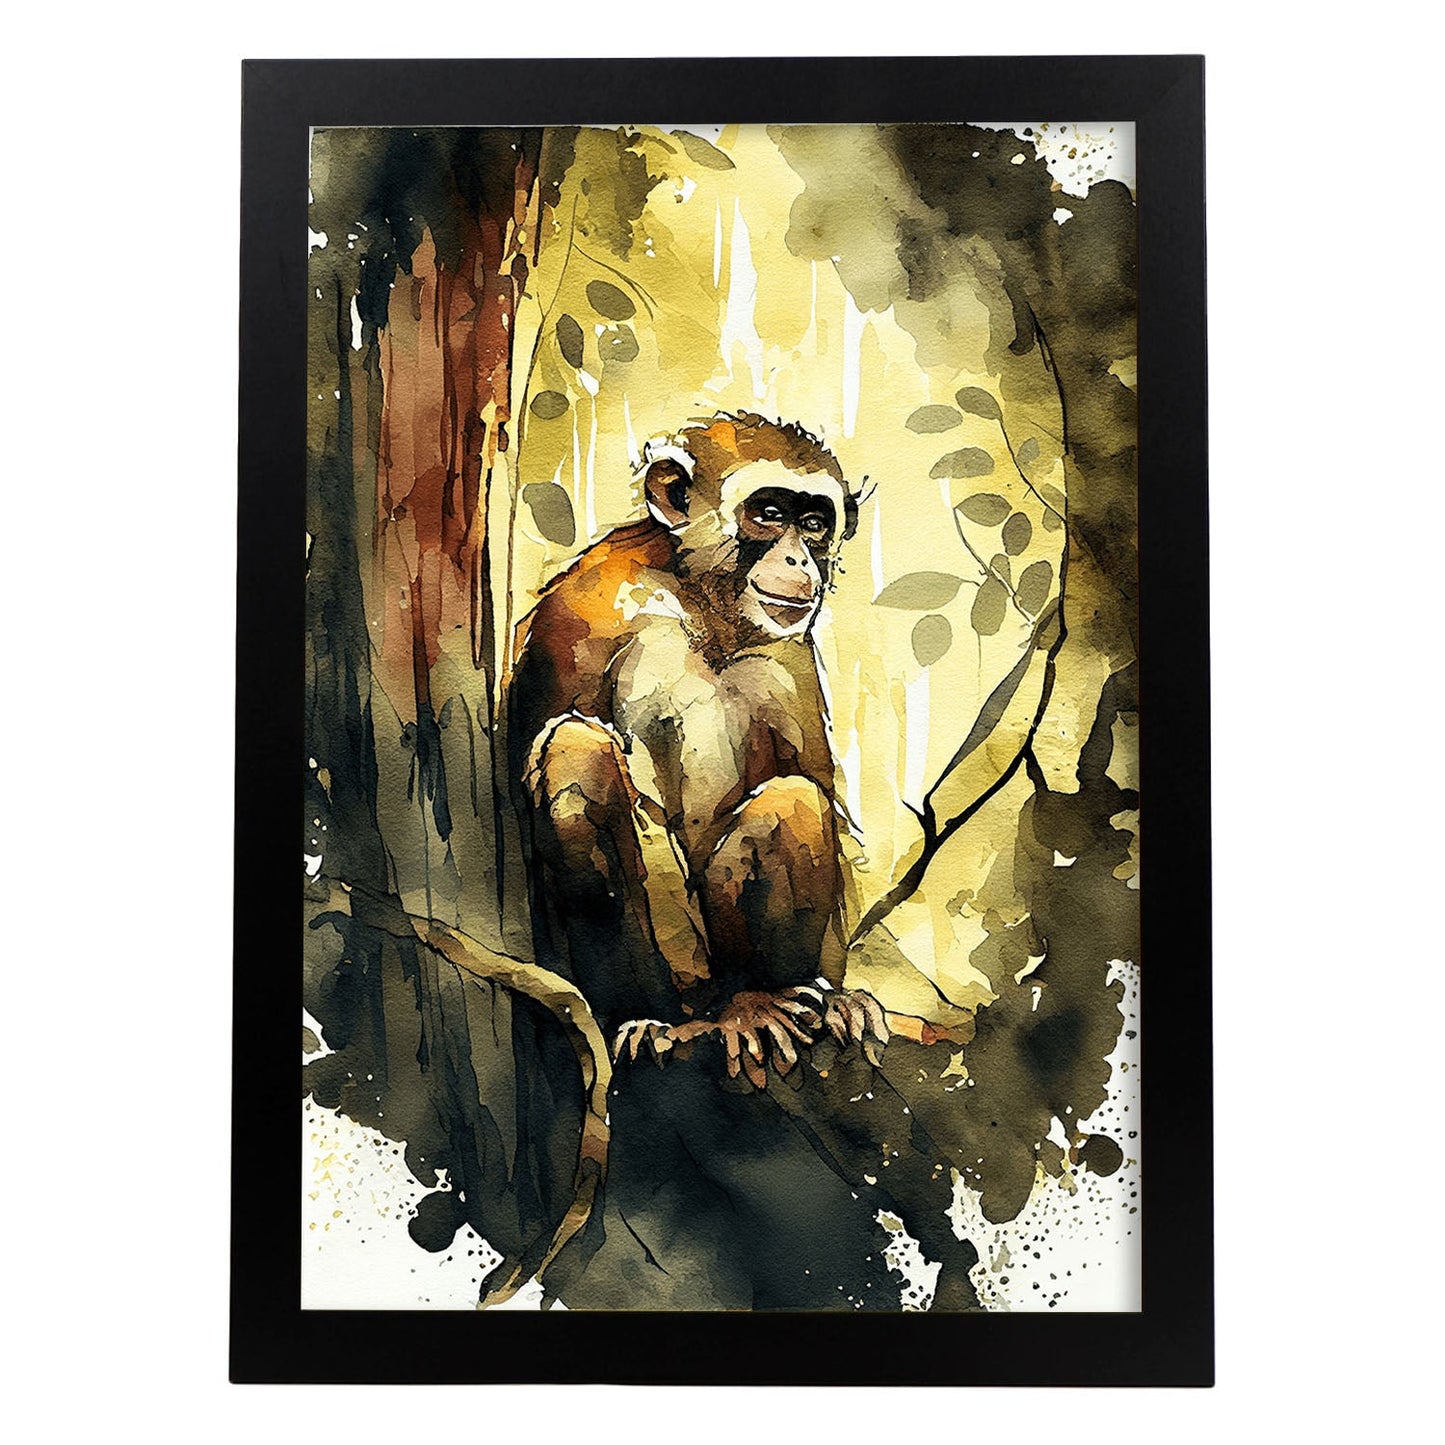 Nacnic Watercolor of Monkey in the forest. Aesthetic Wall Art Prints for Bedroom or Living Room Design.